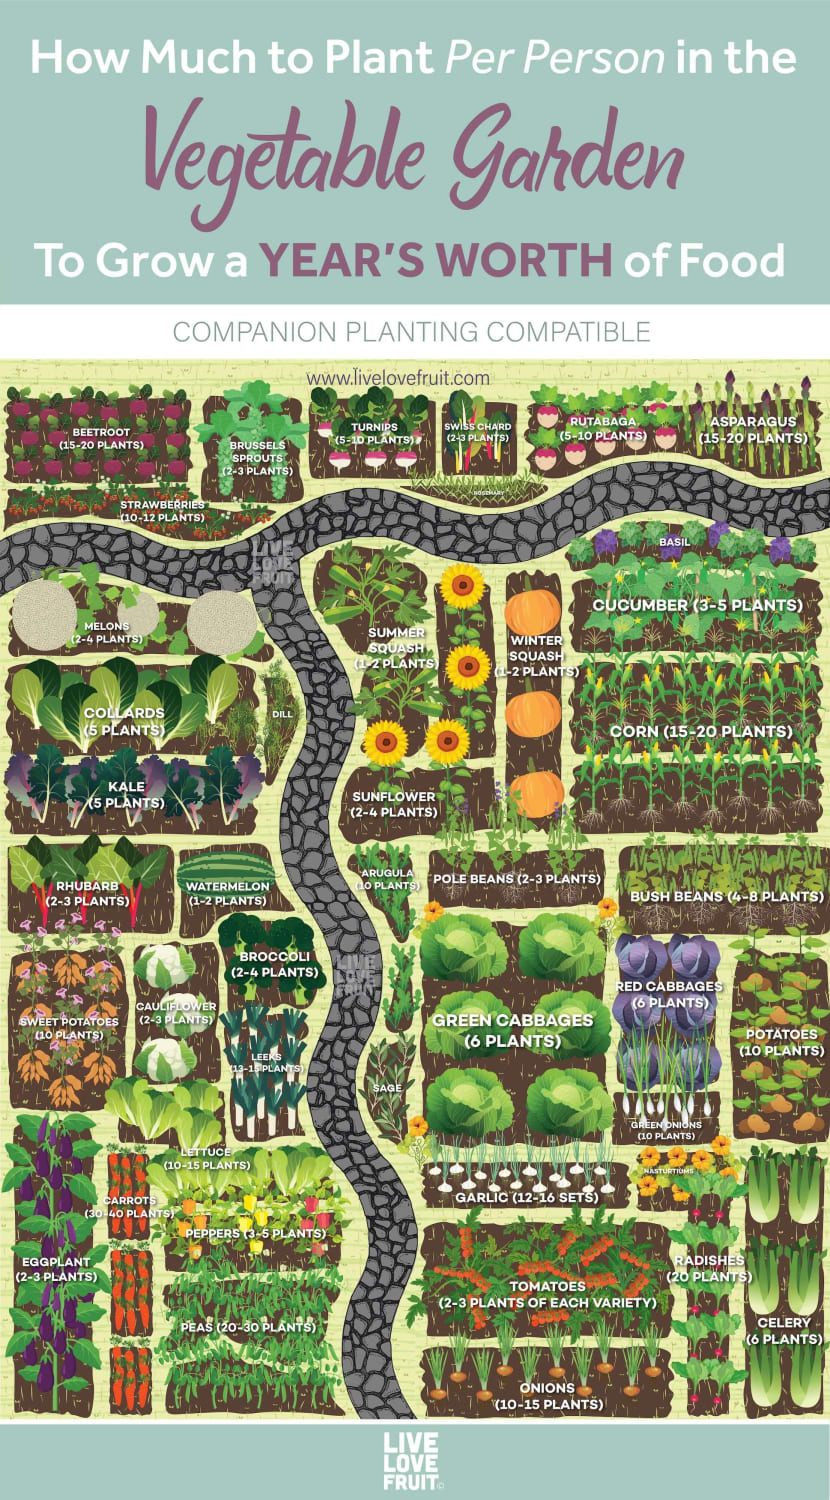 How Much to Plant Per Person in the Vegetable Garden for a Year’s Worth of Food